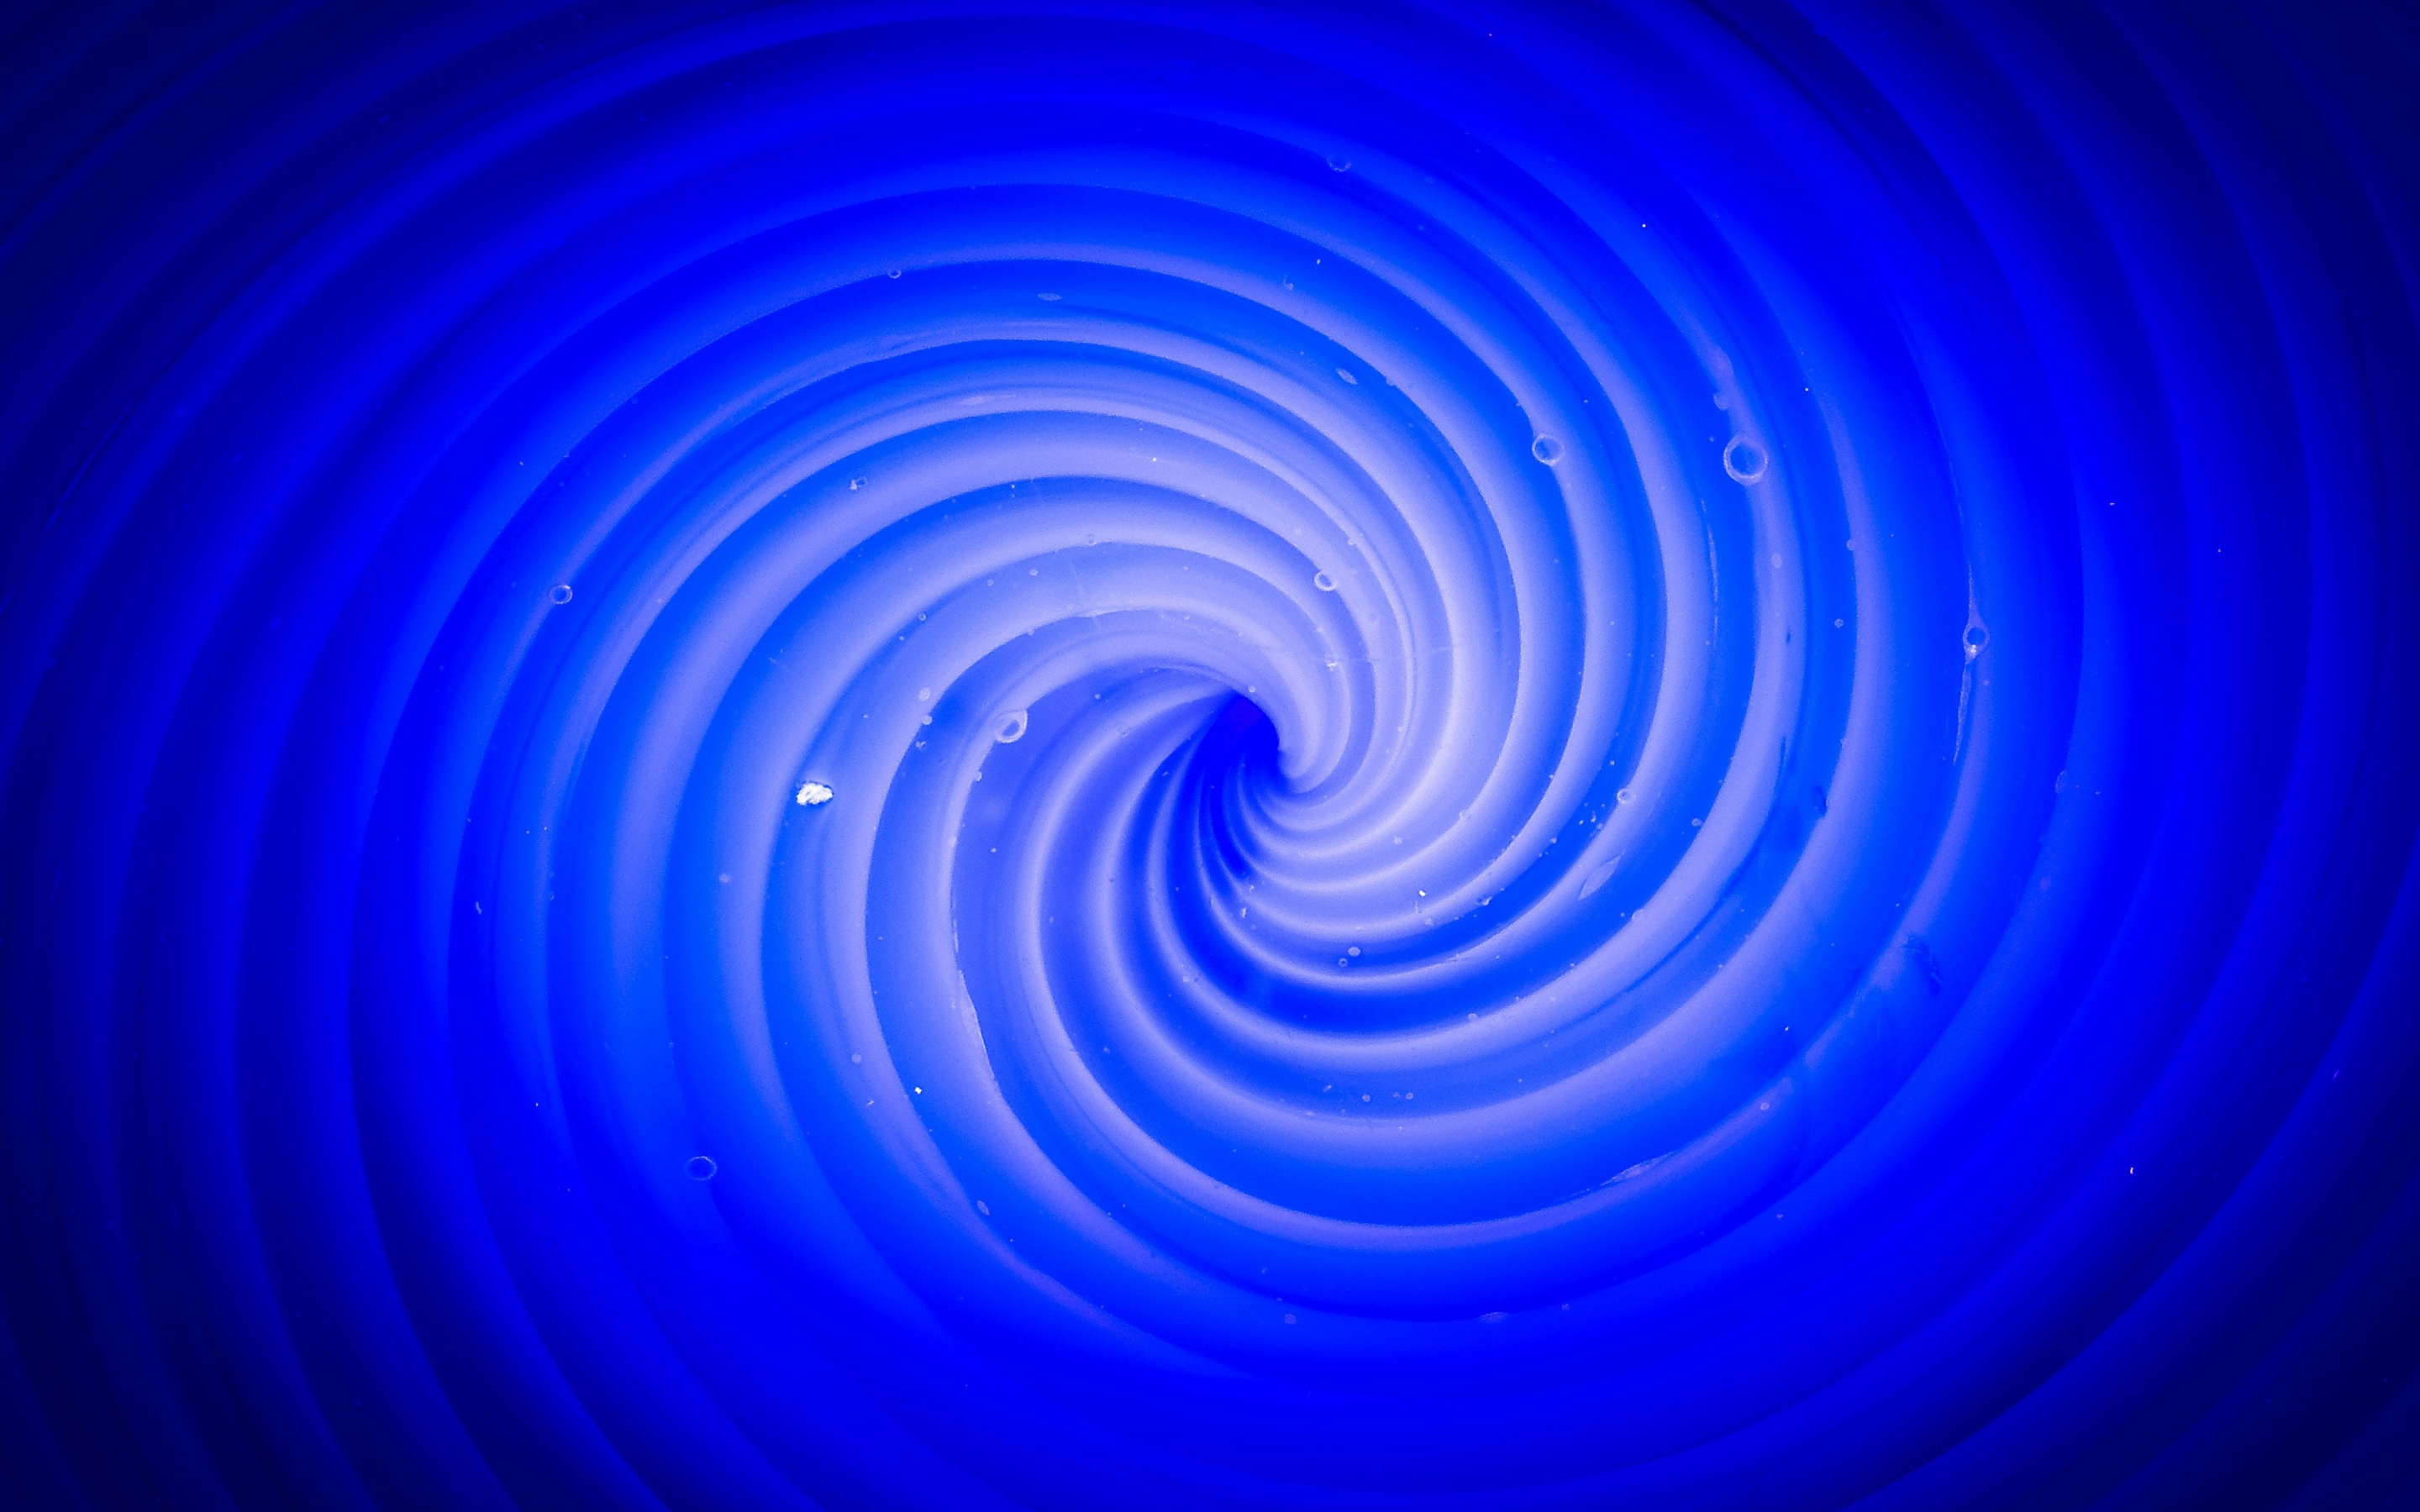 Abstraction, blue swirl, abstract, 2880x1800 wallpaper